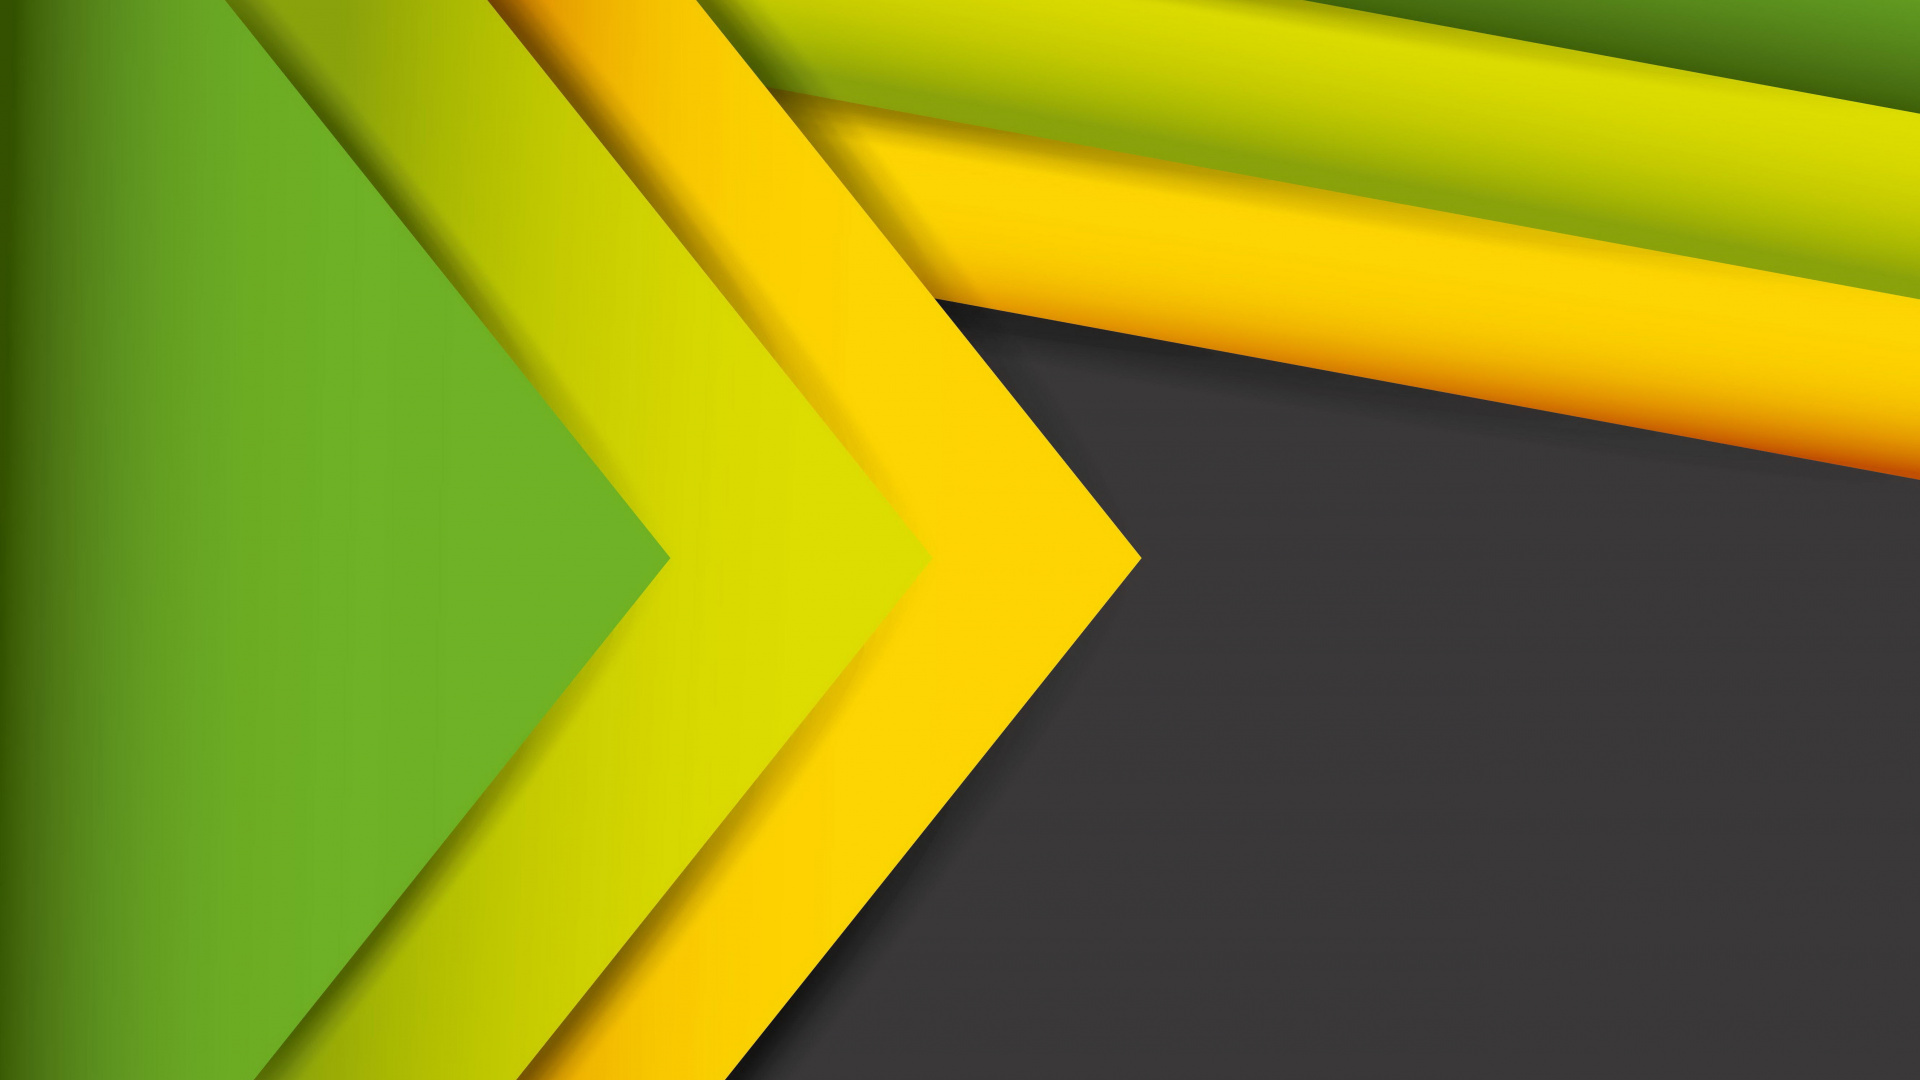 Yellow and Green Triangle Illustration. Wallpaper in 1920x1080 Resolution